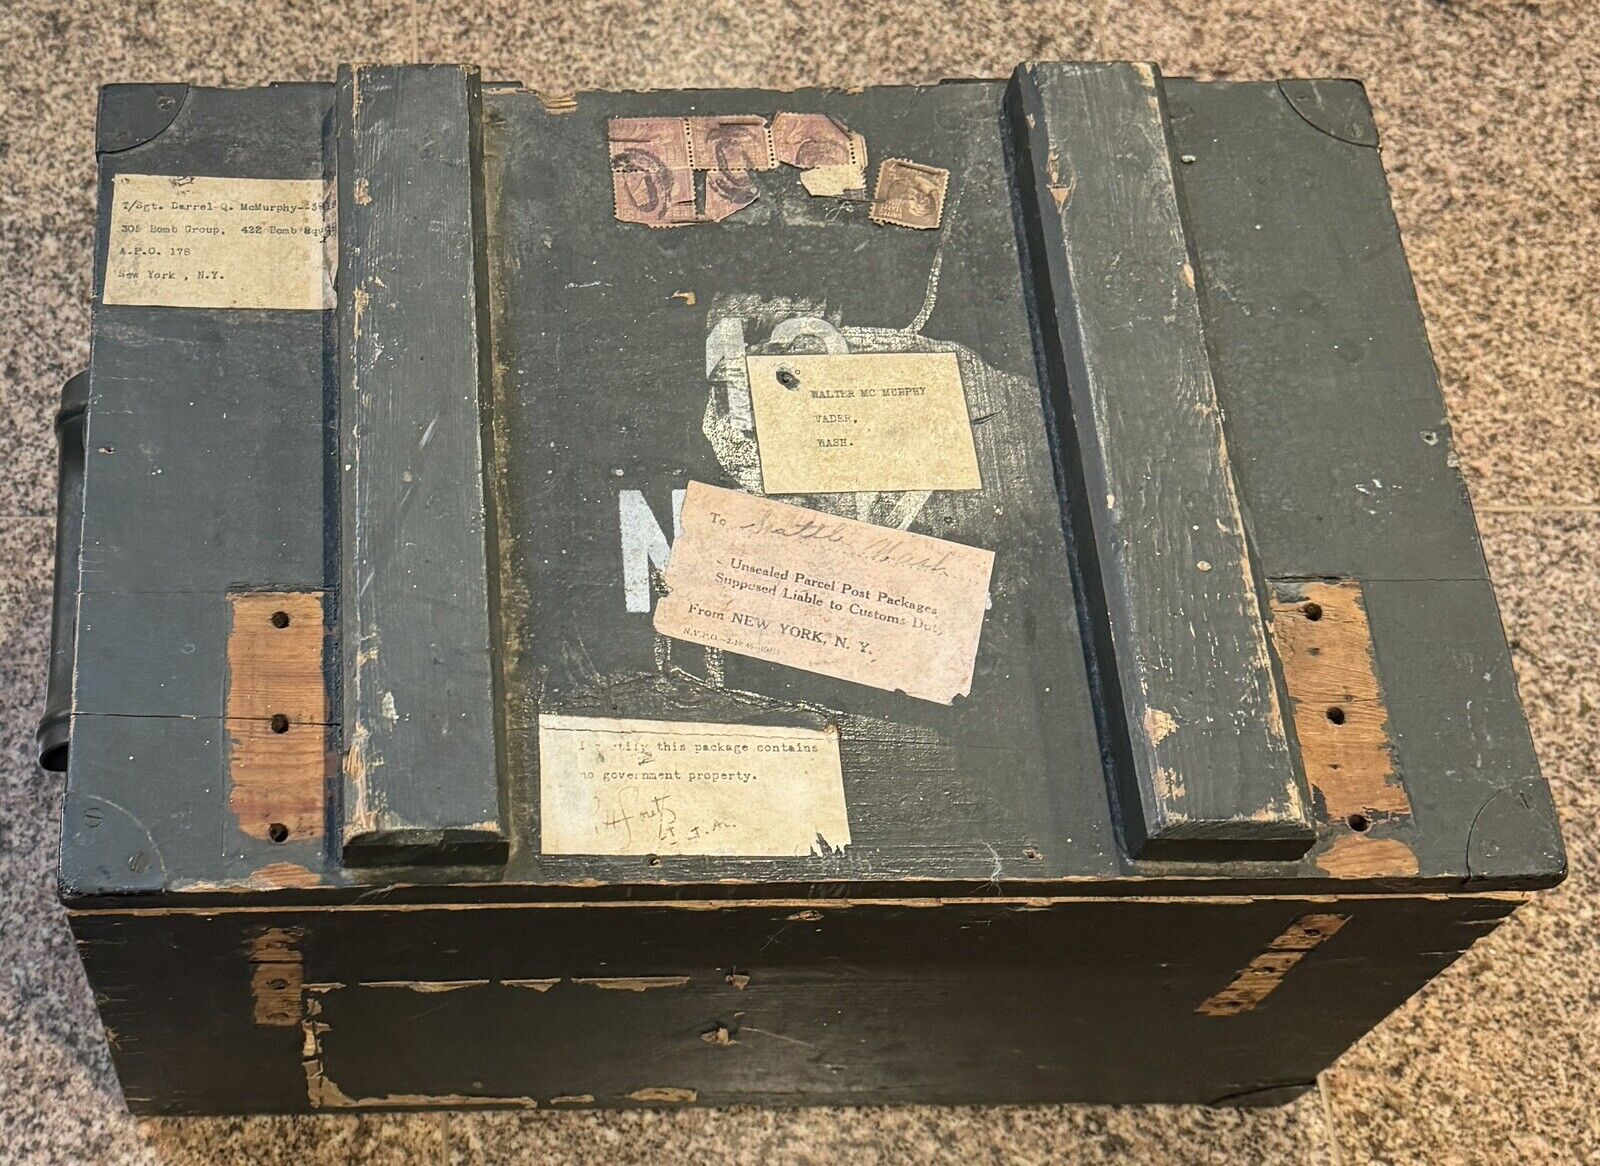 VTG World War 2 WWII US Wooden Shipping Box? 305th Bomb Group 422 Bomb Squadron